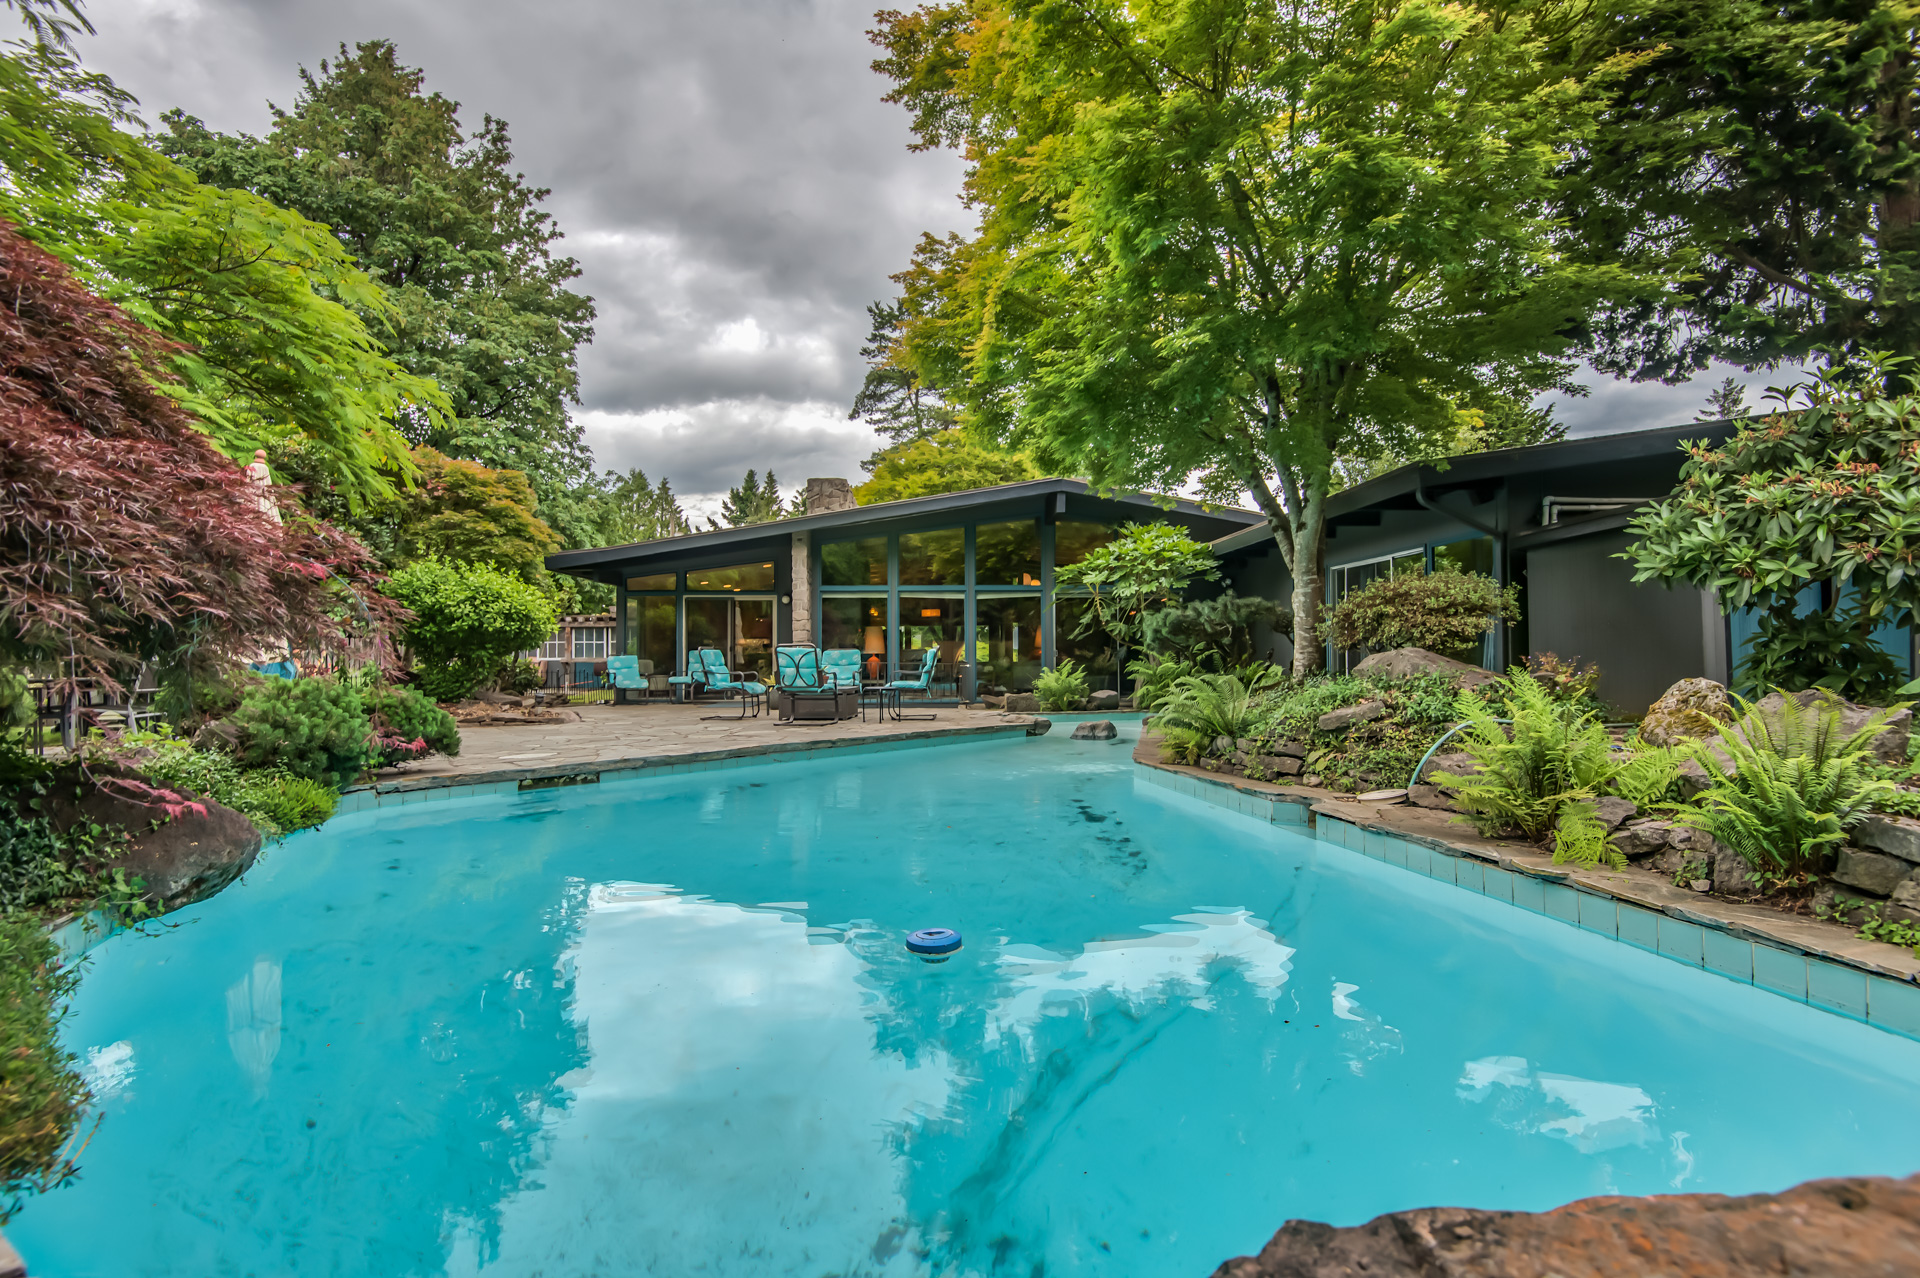 SOLD: The Dreamiest Mid-Mod in Deep East Portland.